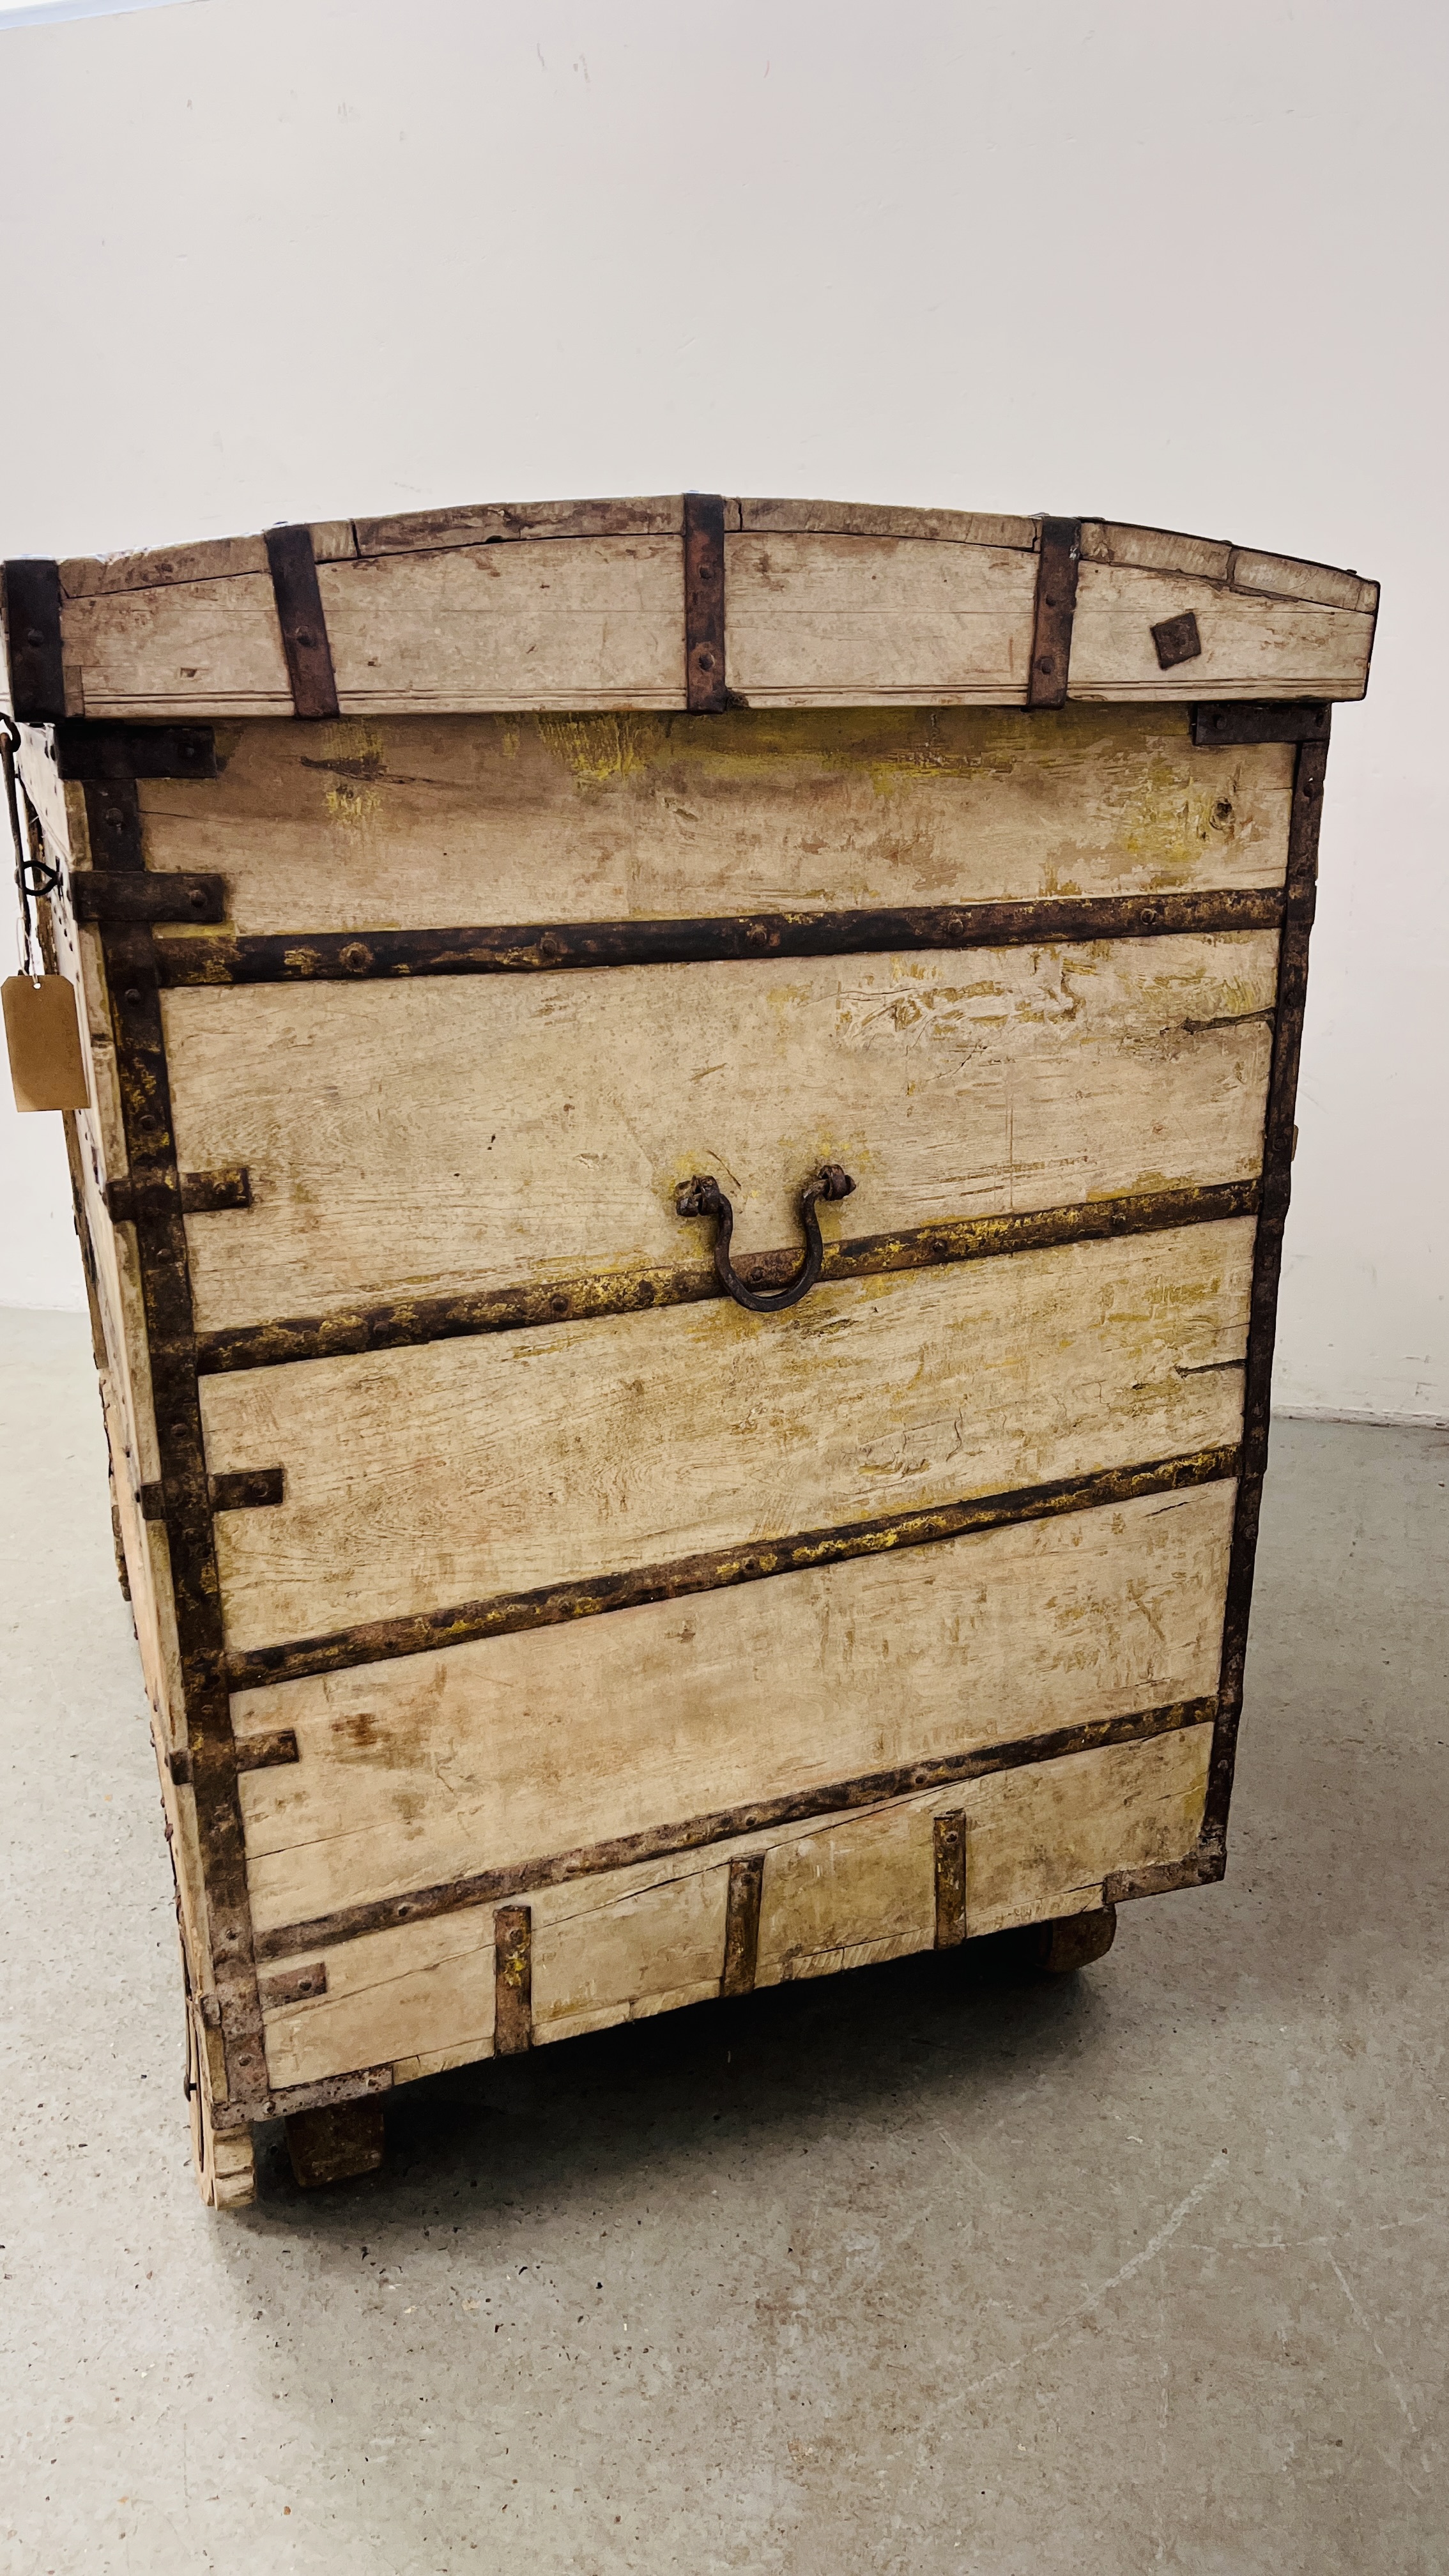 AN EXTREMELY LARGE RAJASTHANI 19th CENTURY DOWRY CHEST - 158CM W X 81CM D X 123CM H. - Image 16 of 30